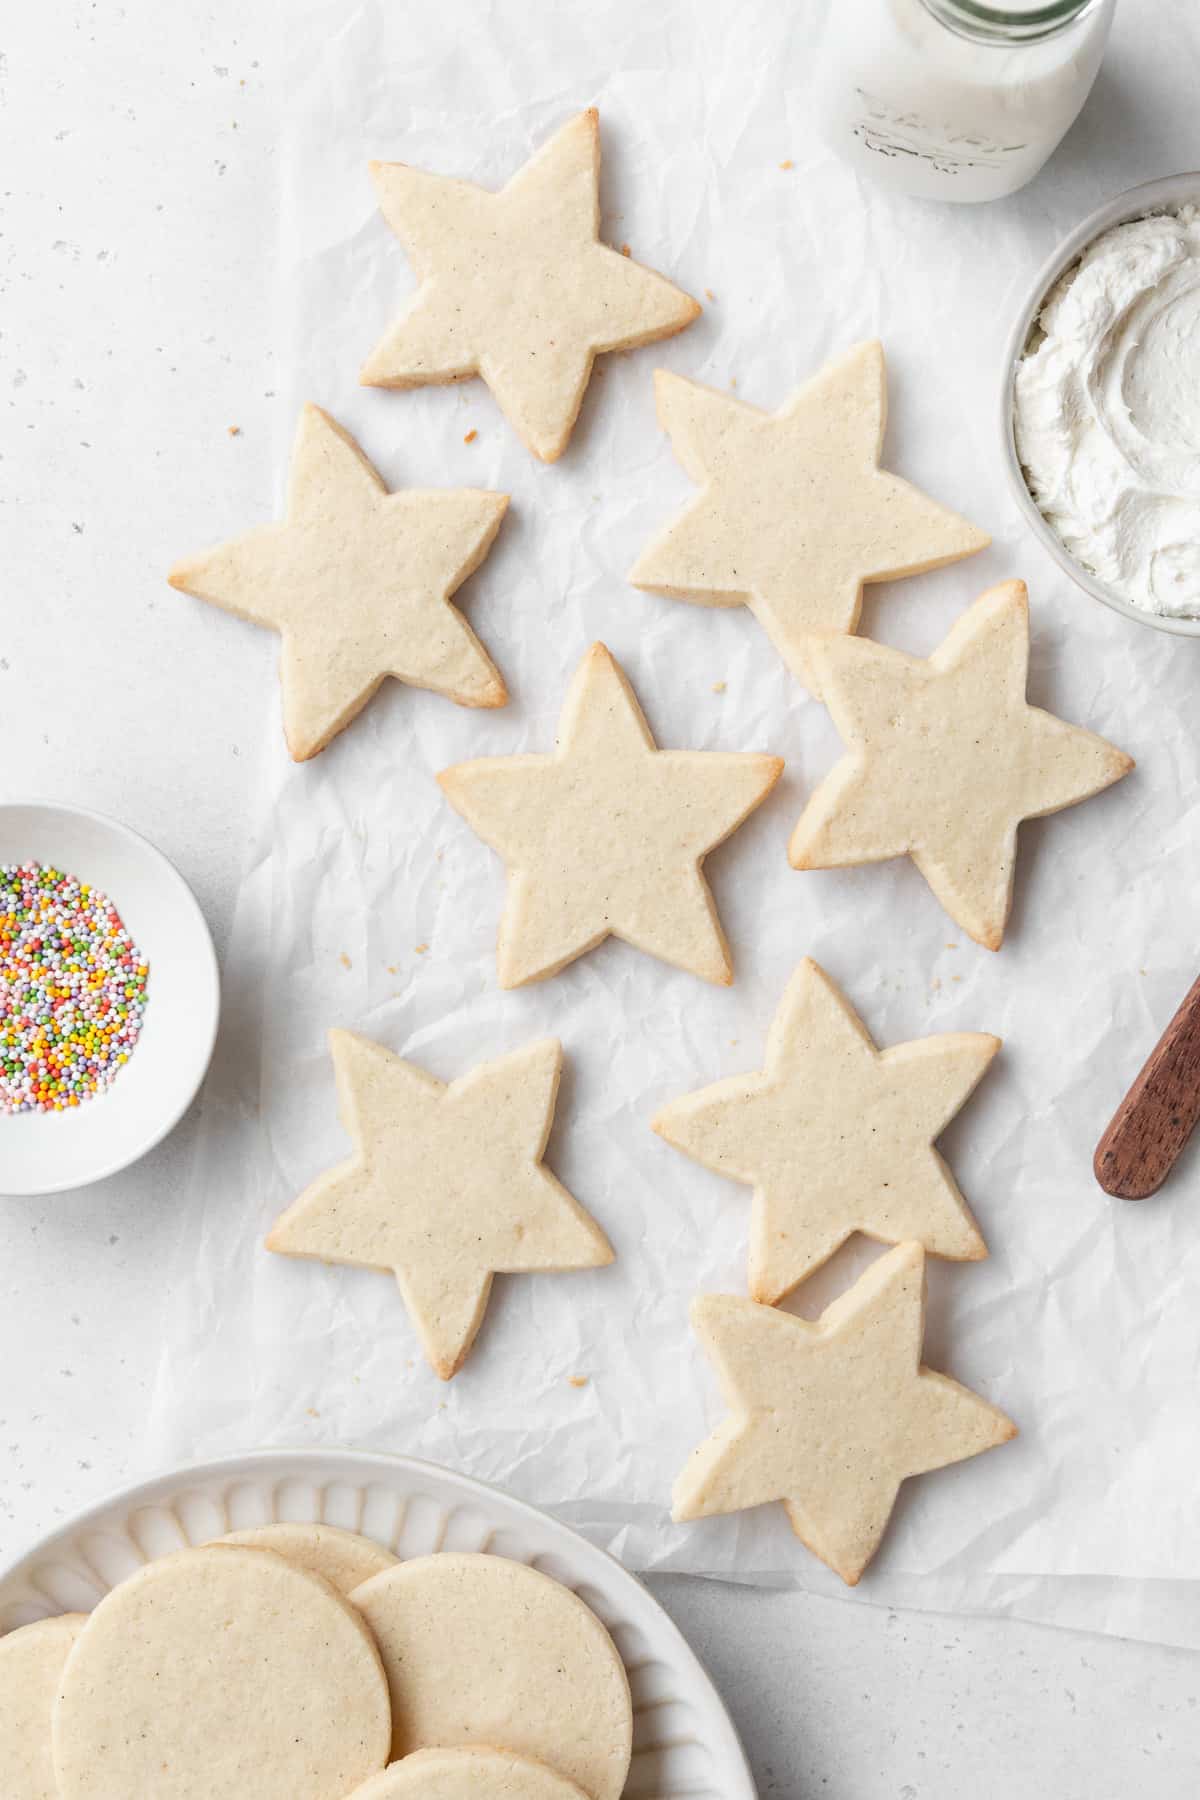 Star shaped gluten free sugar cookies on a white surface, with a small dish of sprinkles, a bowl of frosting, and a plate of circular sugar cookies on a plate surrounding them.